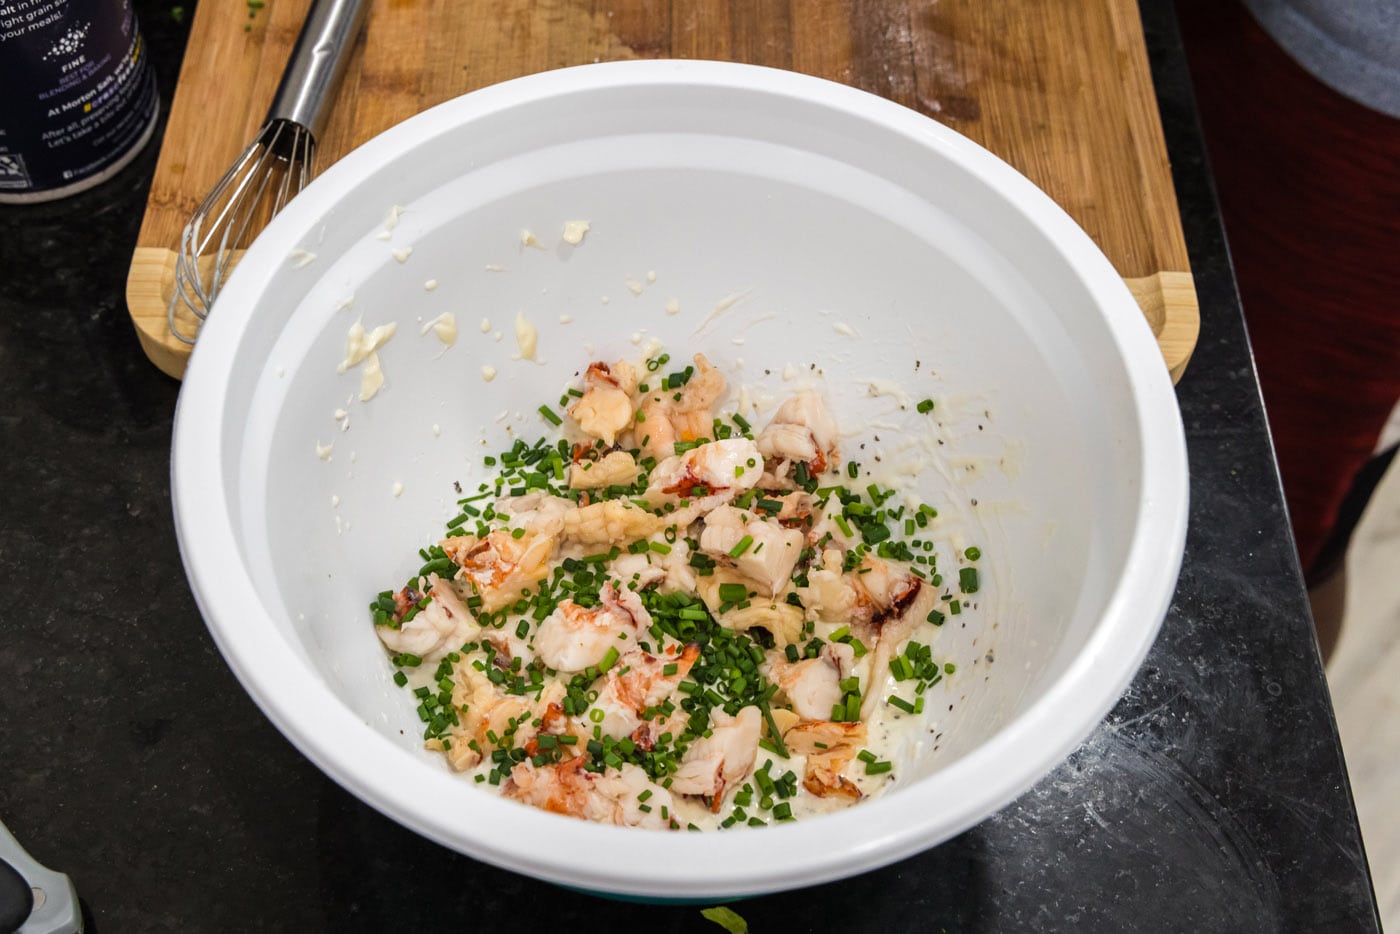 chopped chives added to cooked lobster meat and dressing in a bowl